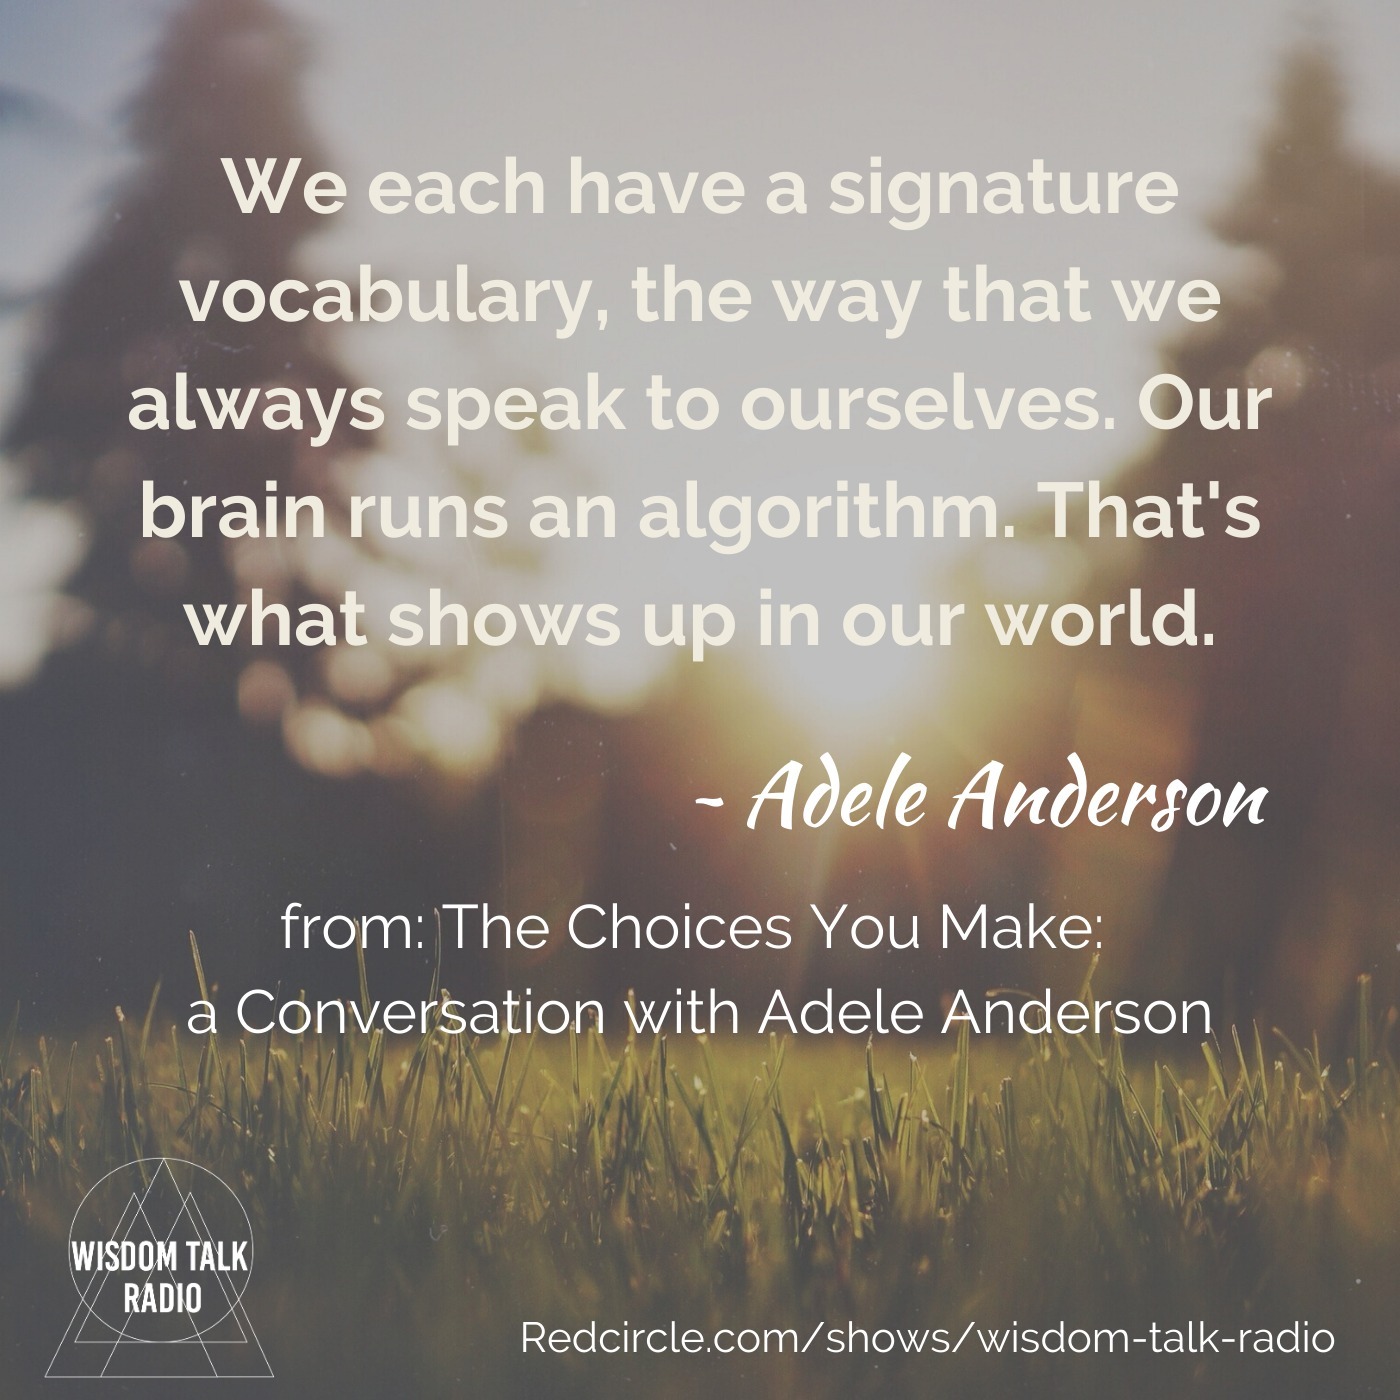 The Choices You Make: a Conversation with Adele Anderson